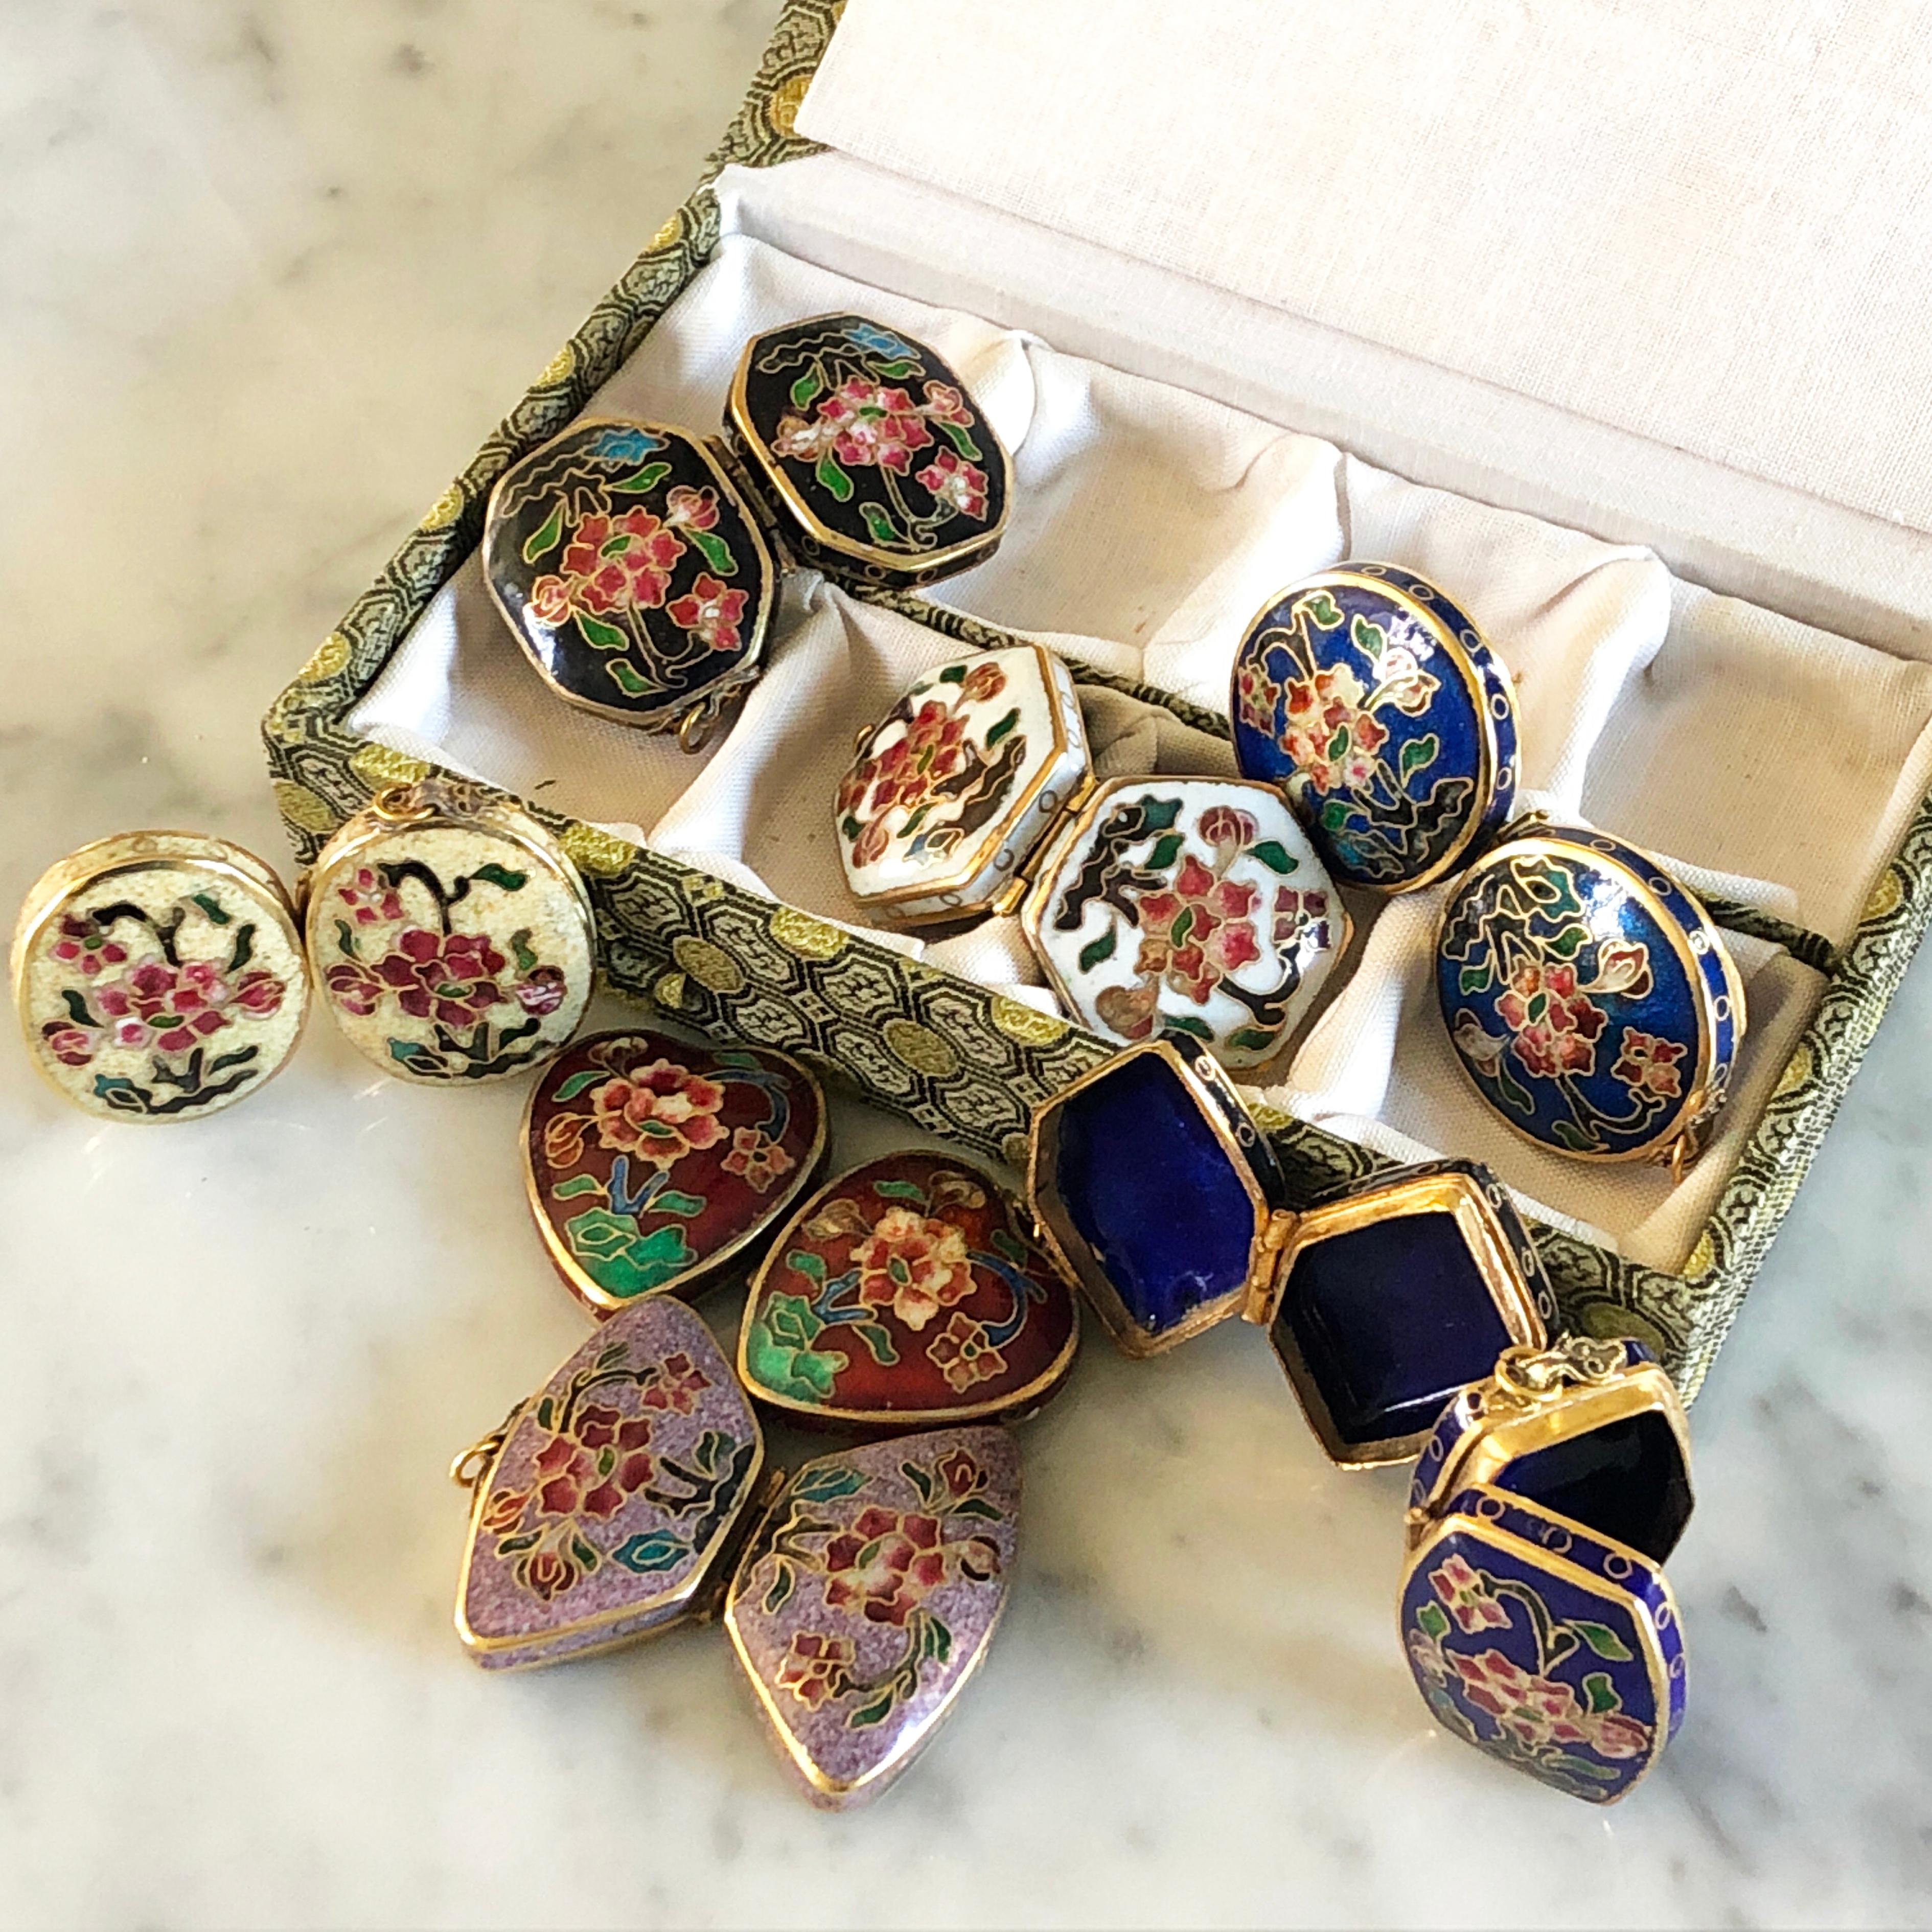 1930 Chinese Export Cloisonné Pill Boxes Collection 4